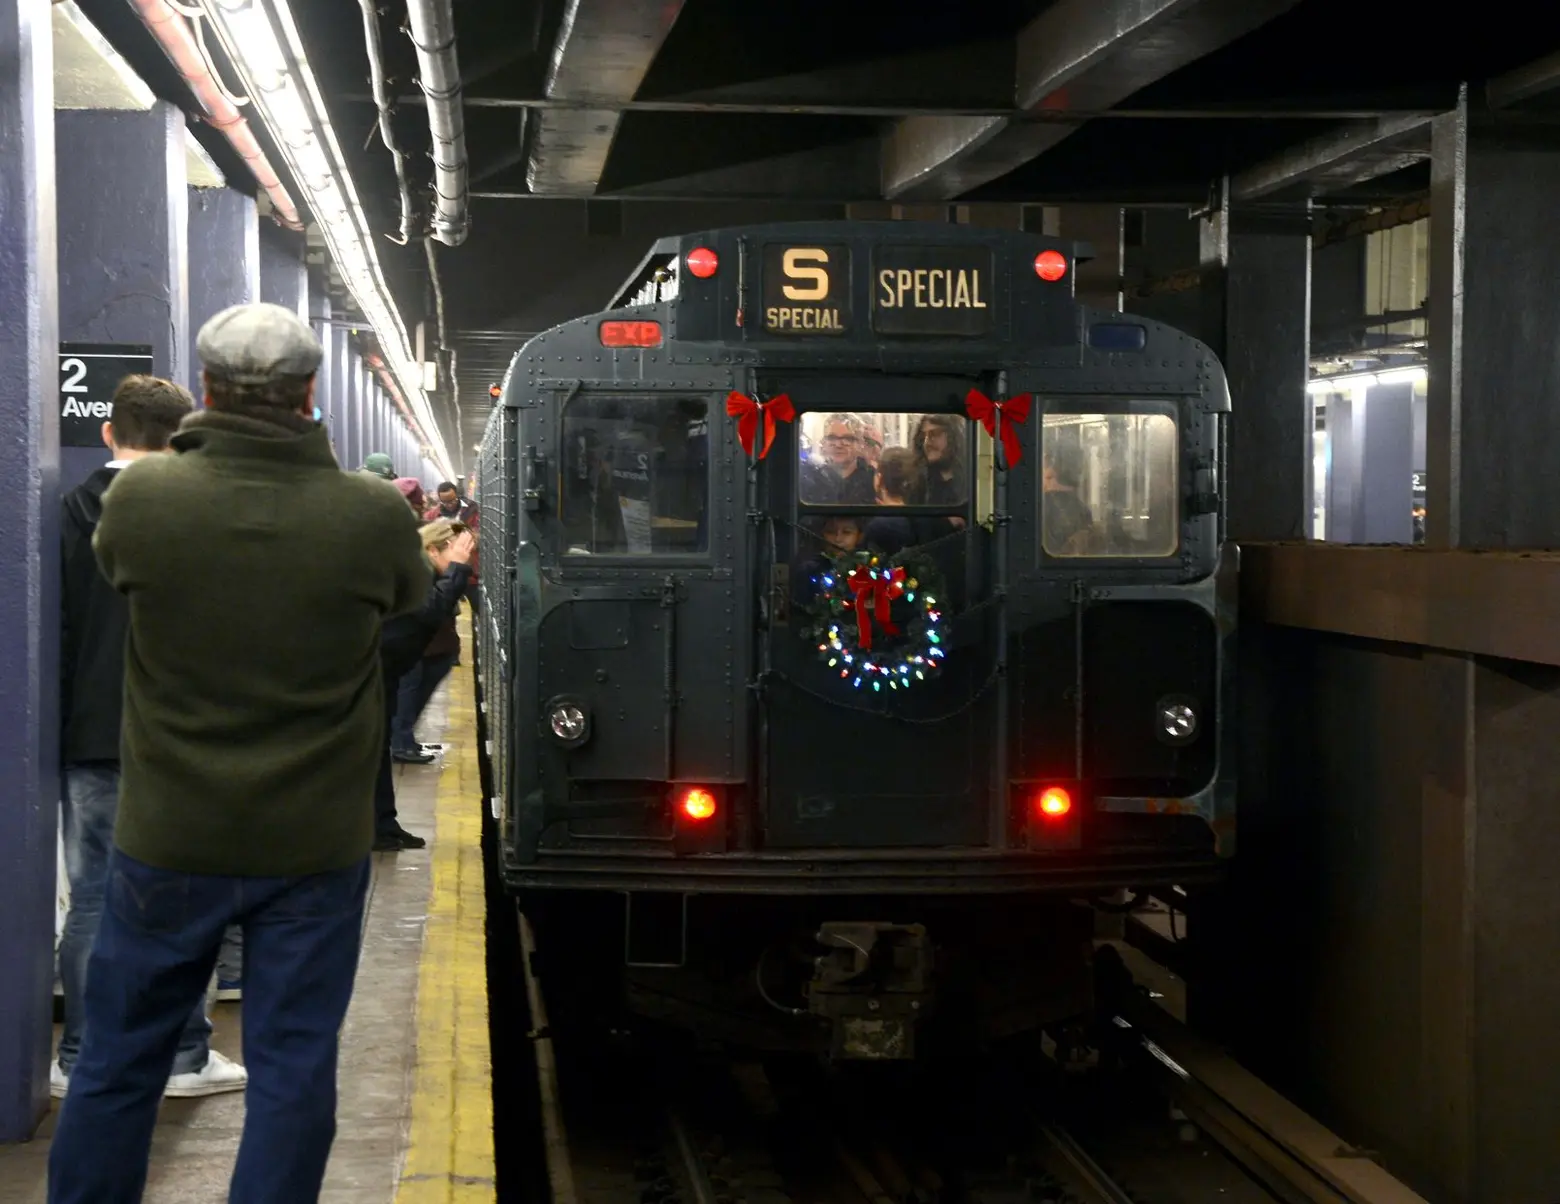 Every Sunday during the holidays, ride a vintage 1930s subway around NYC